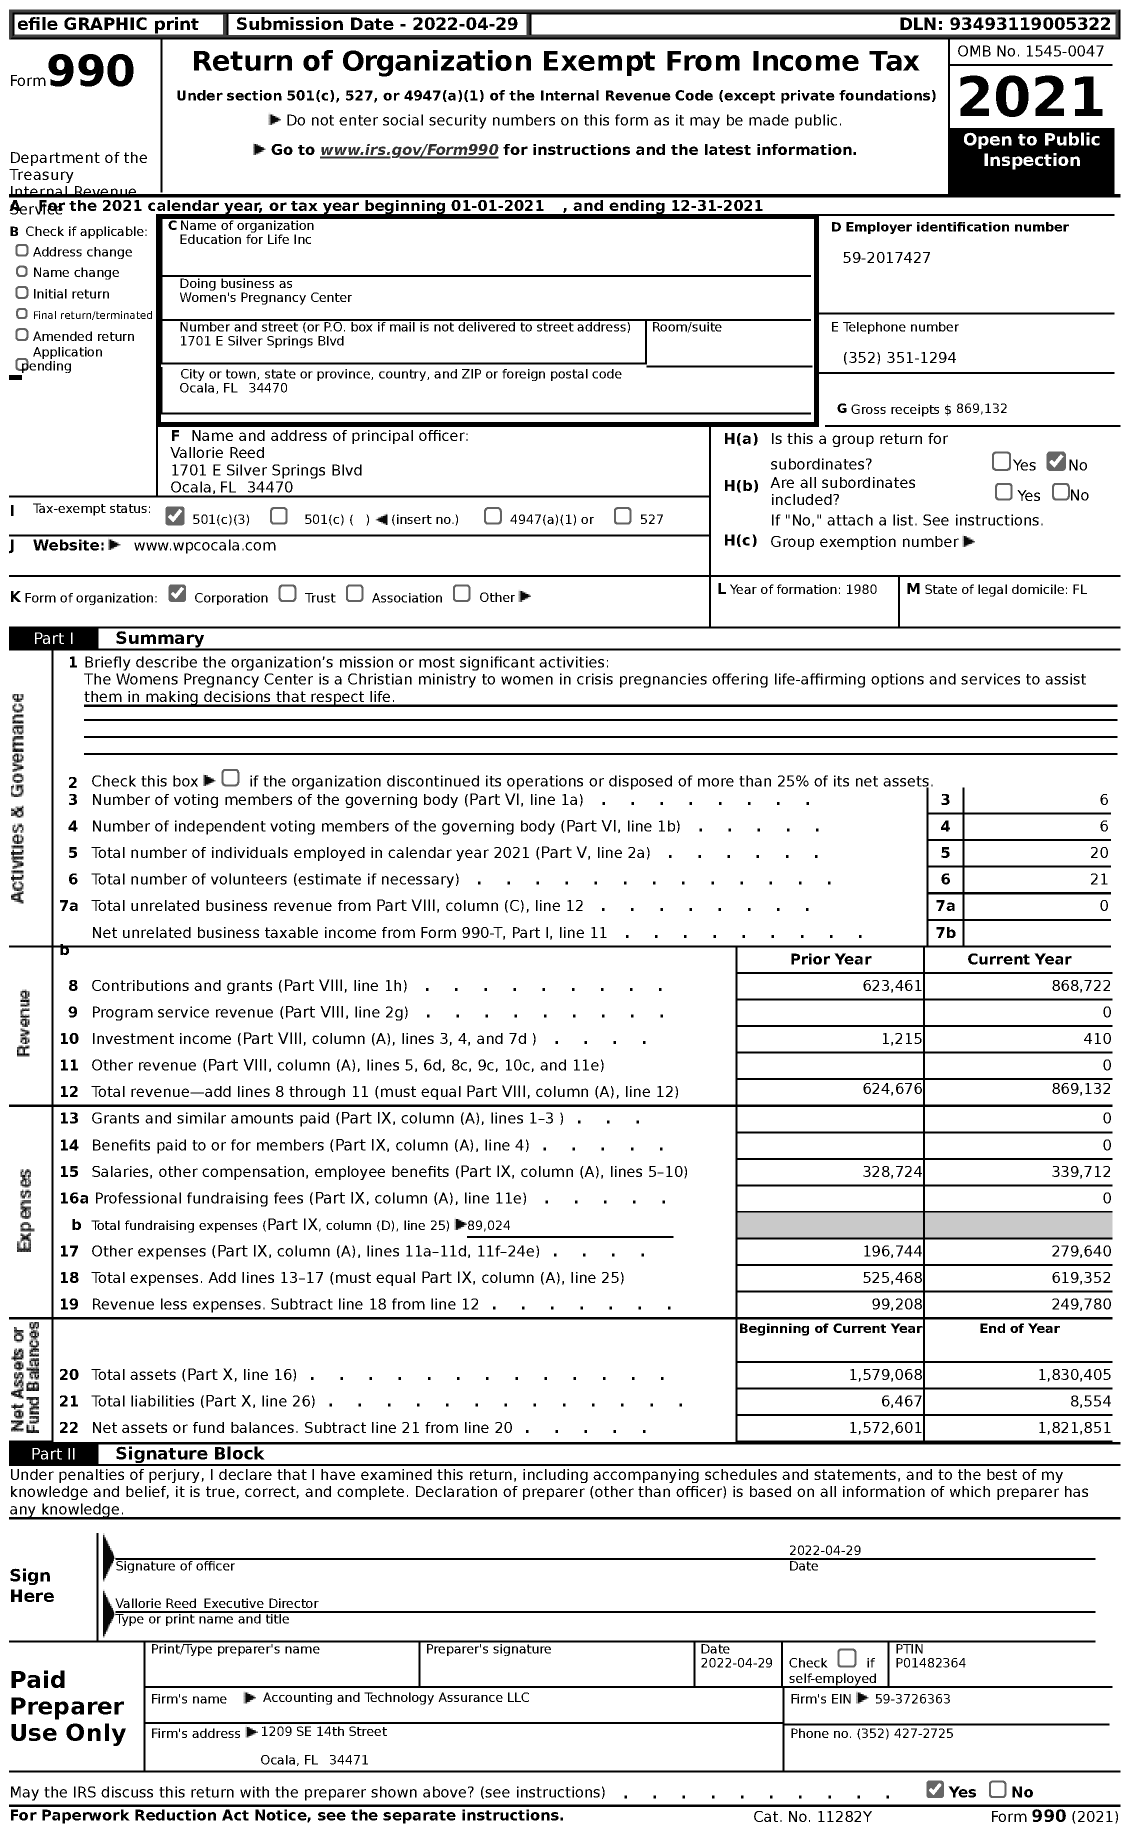 Image of first page of 2021 Form 990 for Education for Life / Women's Pregnancy Center